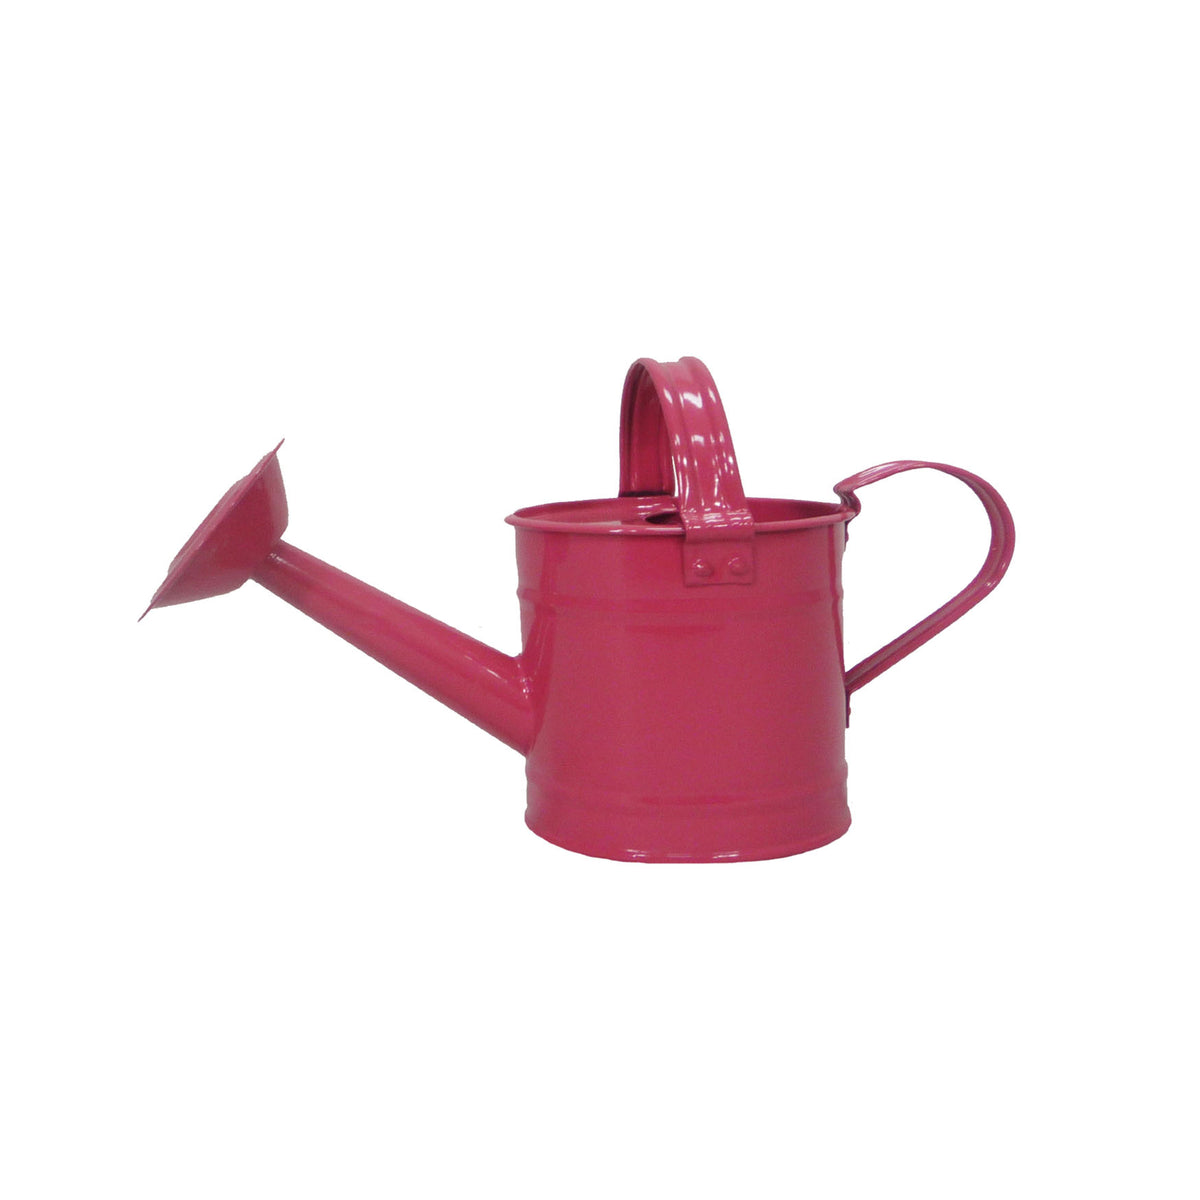 1 pt Mixed Case Kids Metal Watering Cans